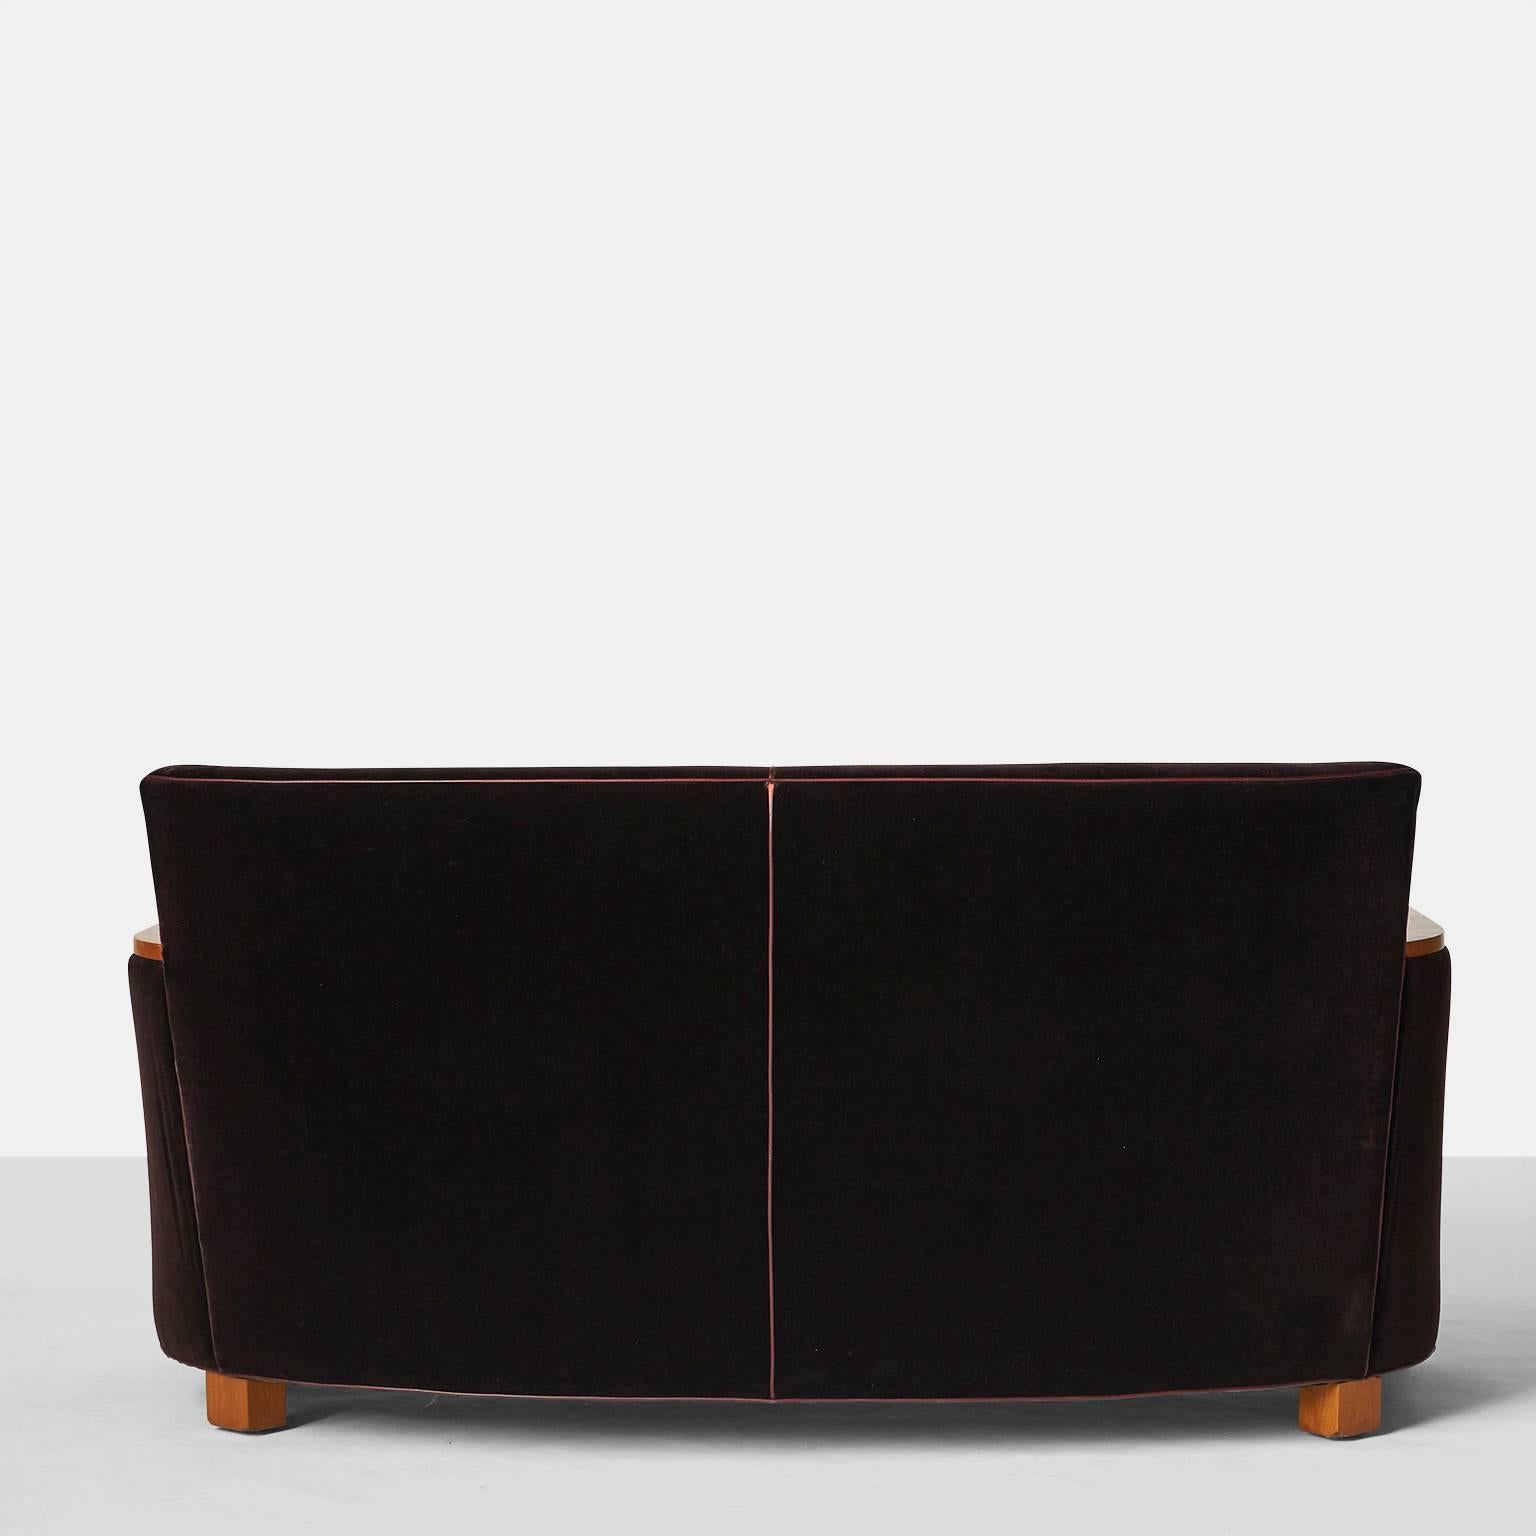 Jacques Adnet Sofa In Good Condition For Sale In San Francisco, CA